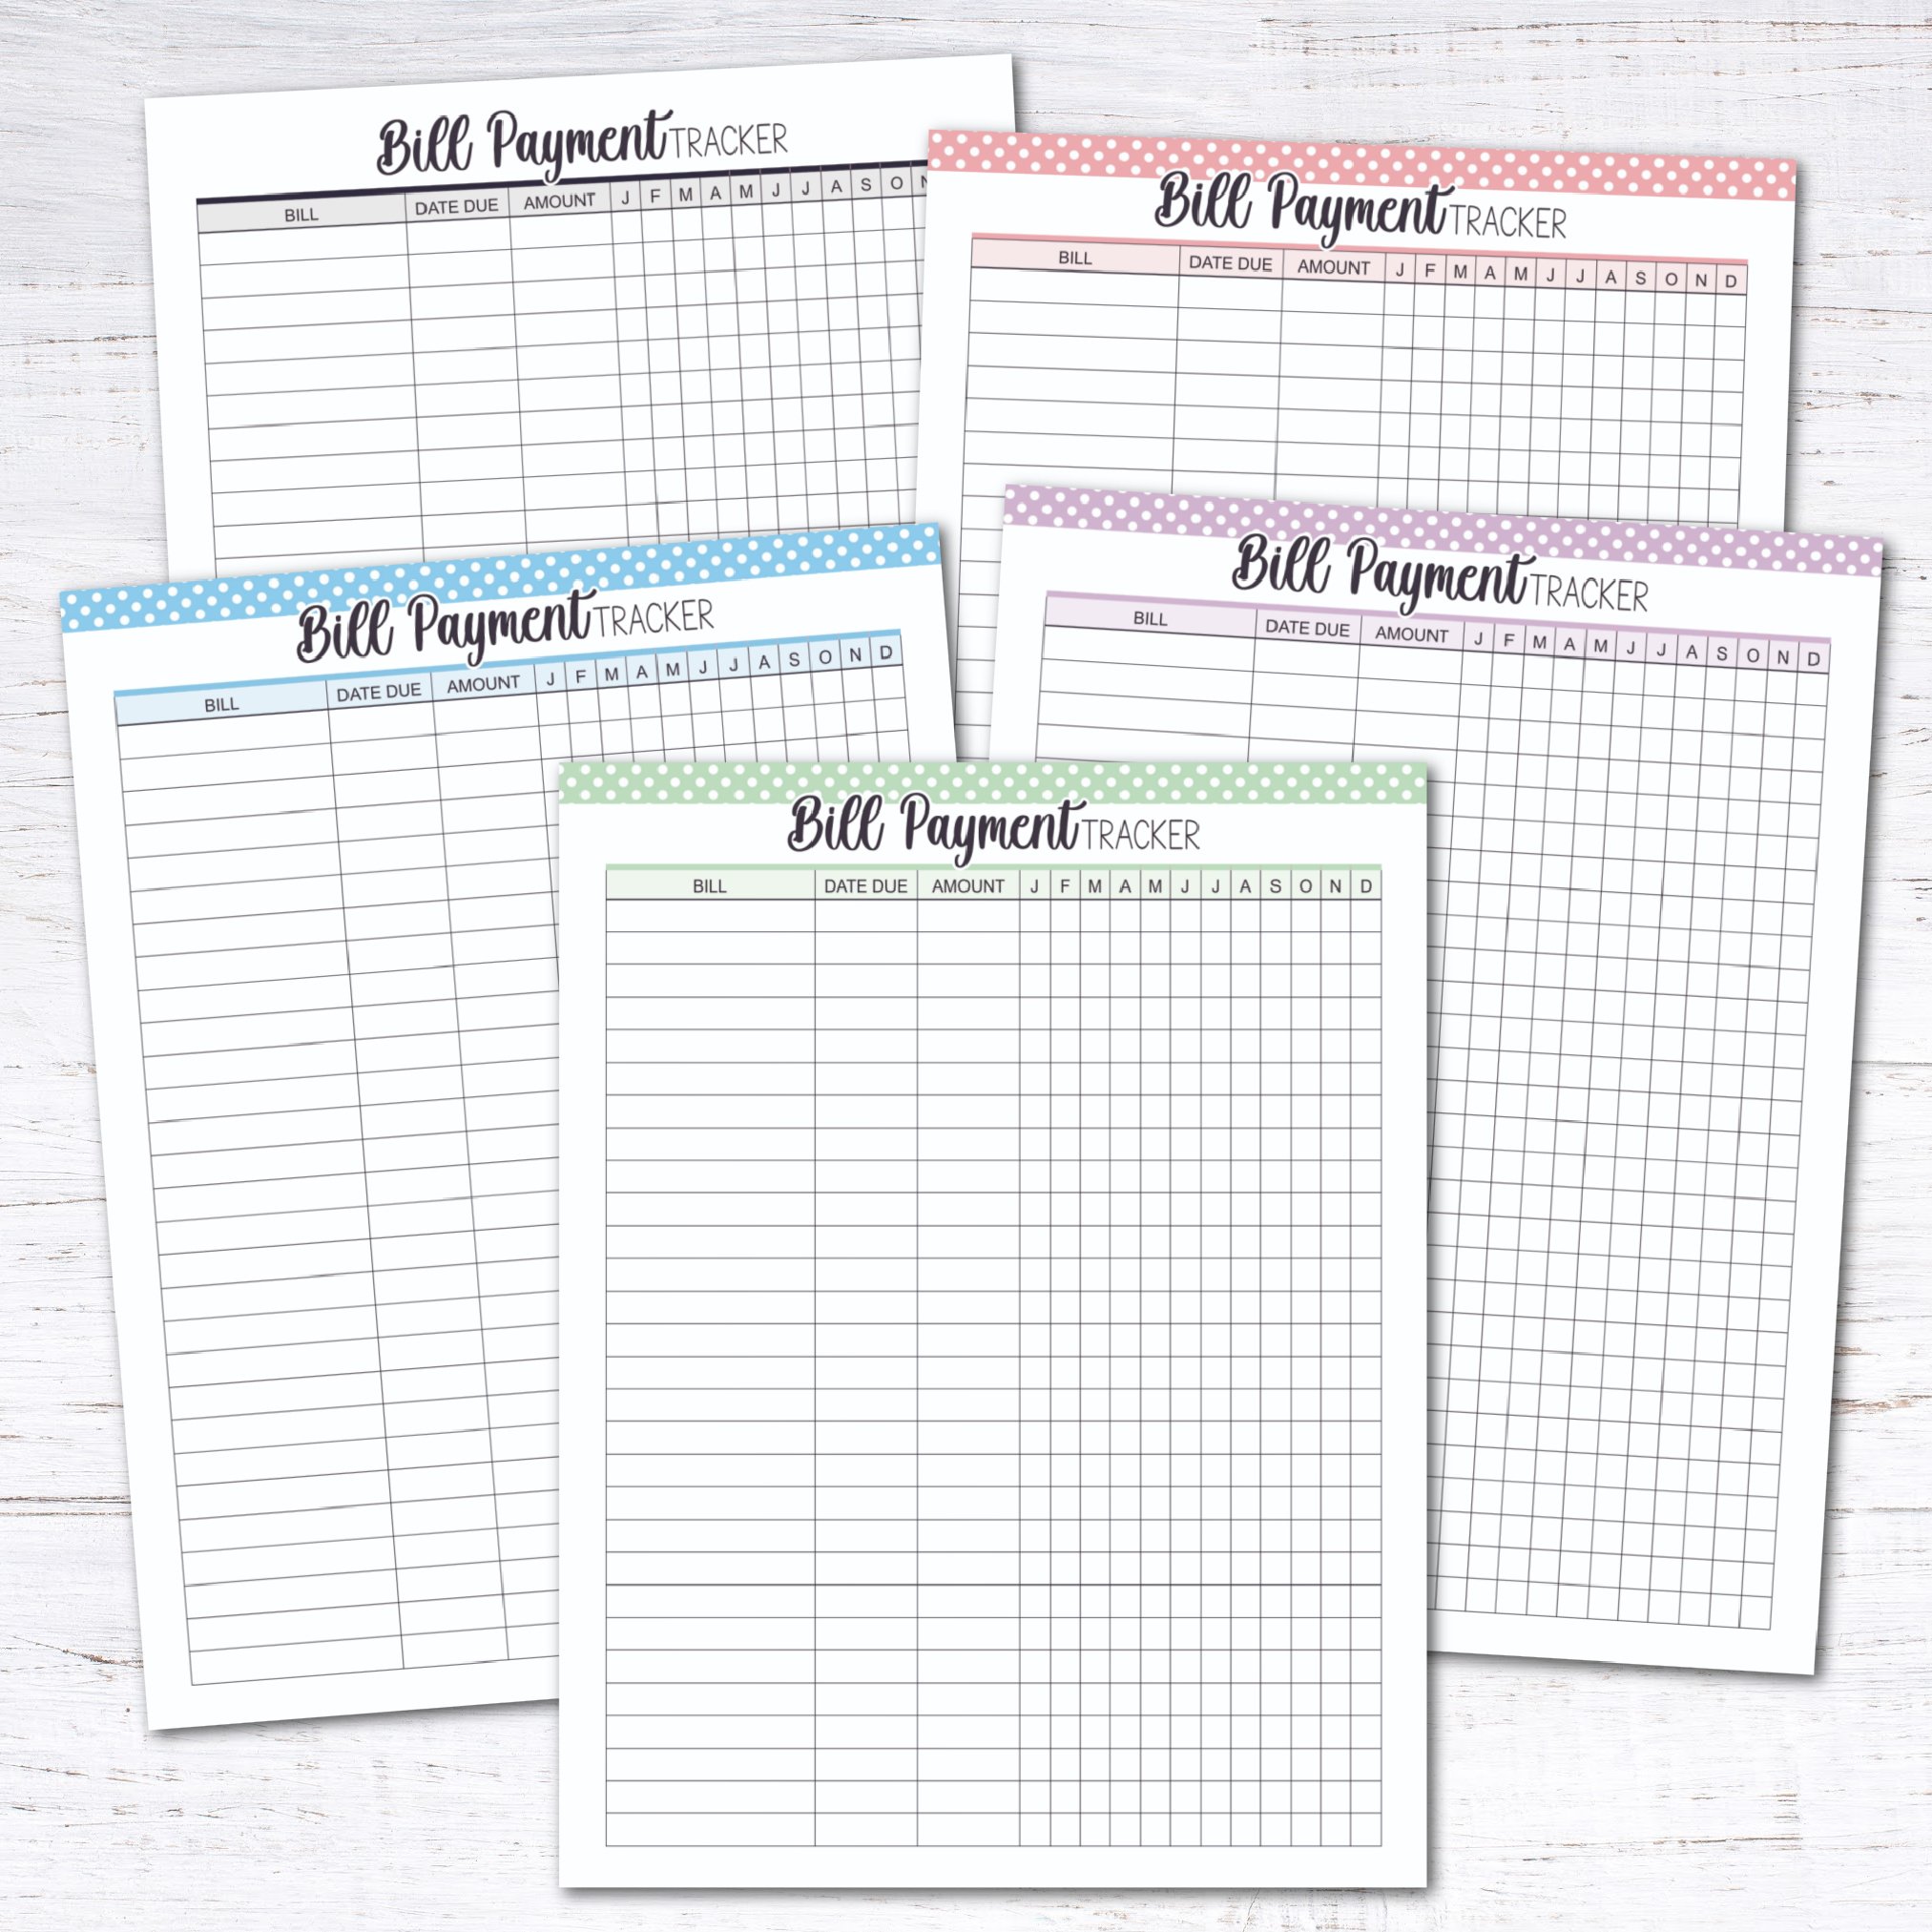 Bill Payment Tracker Free Printable (Day 4)